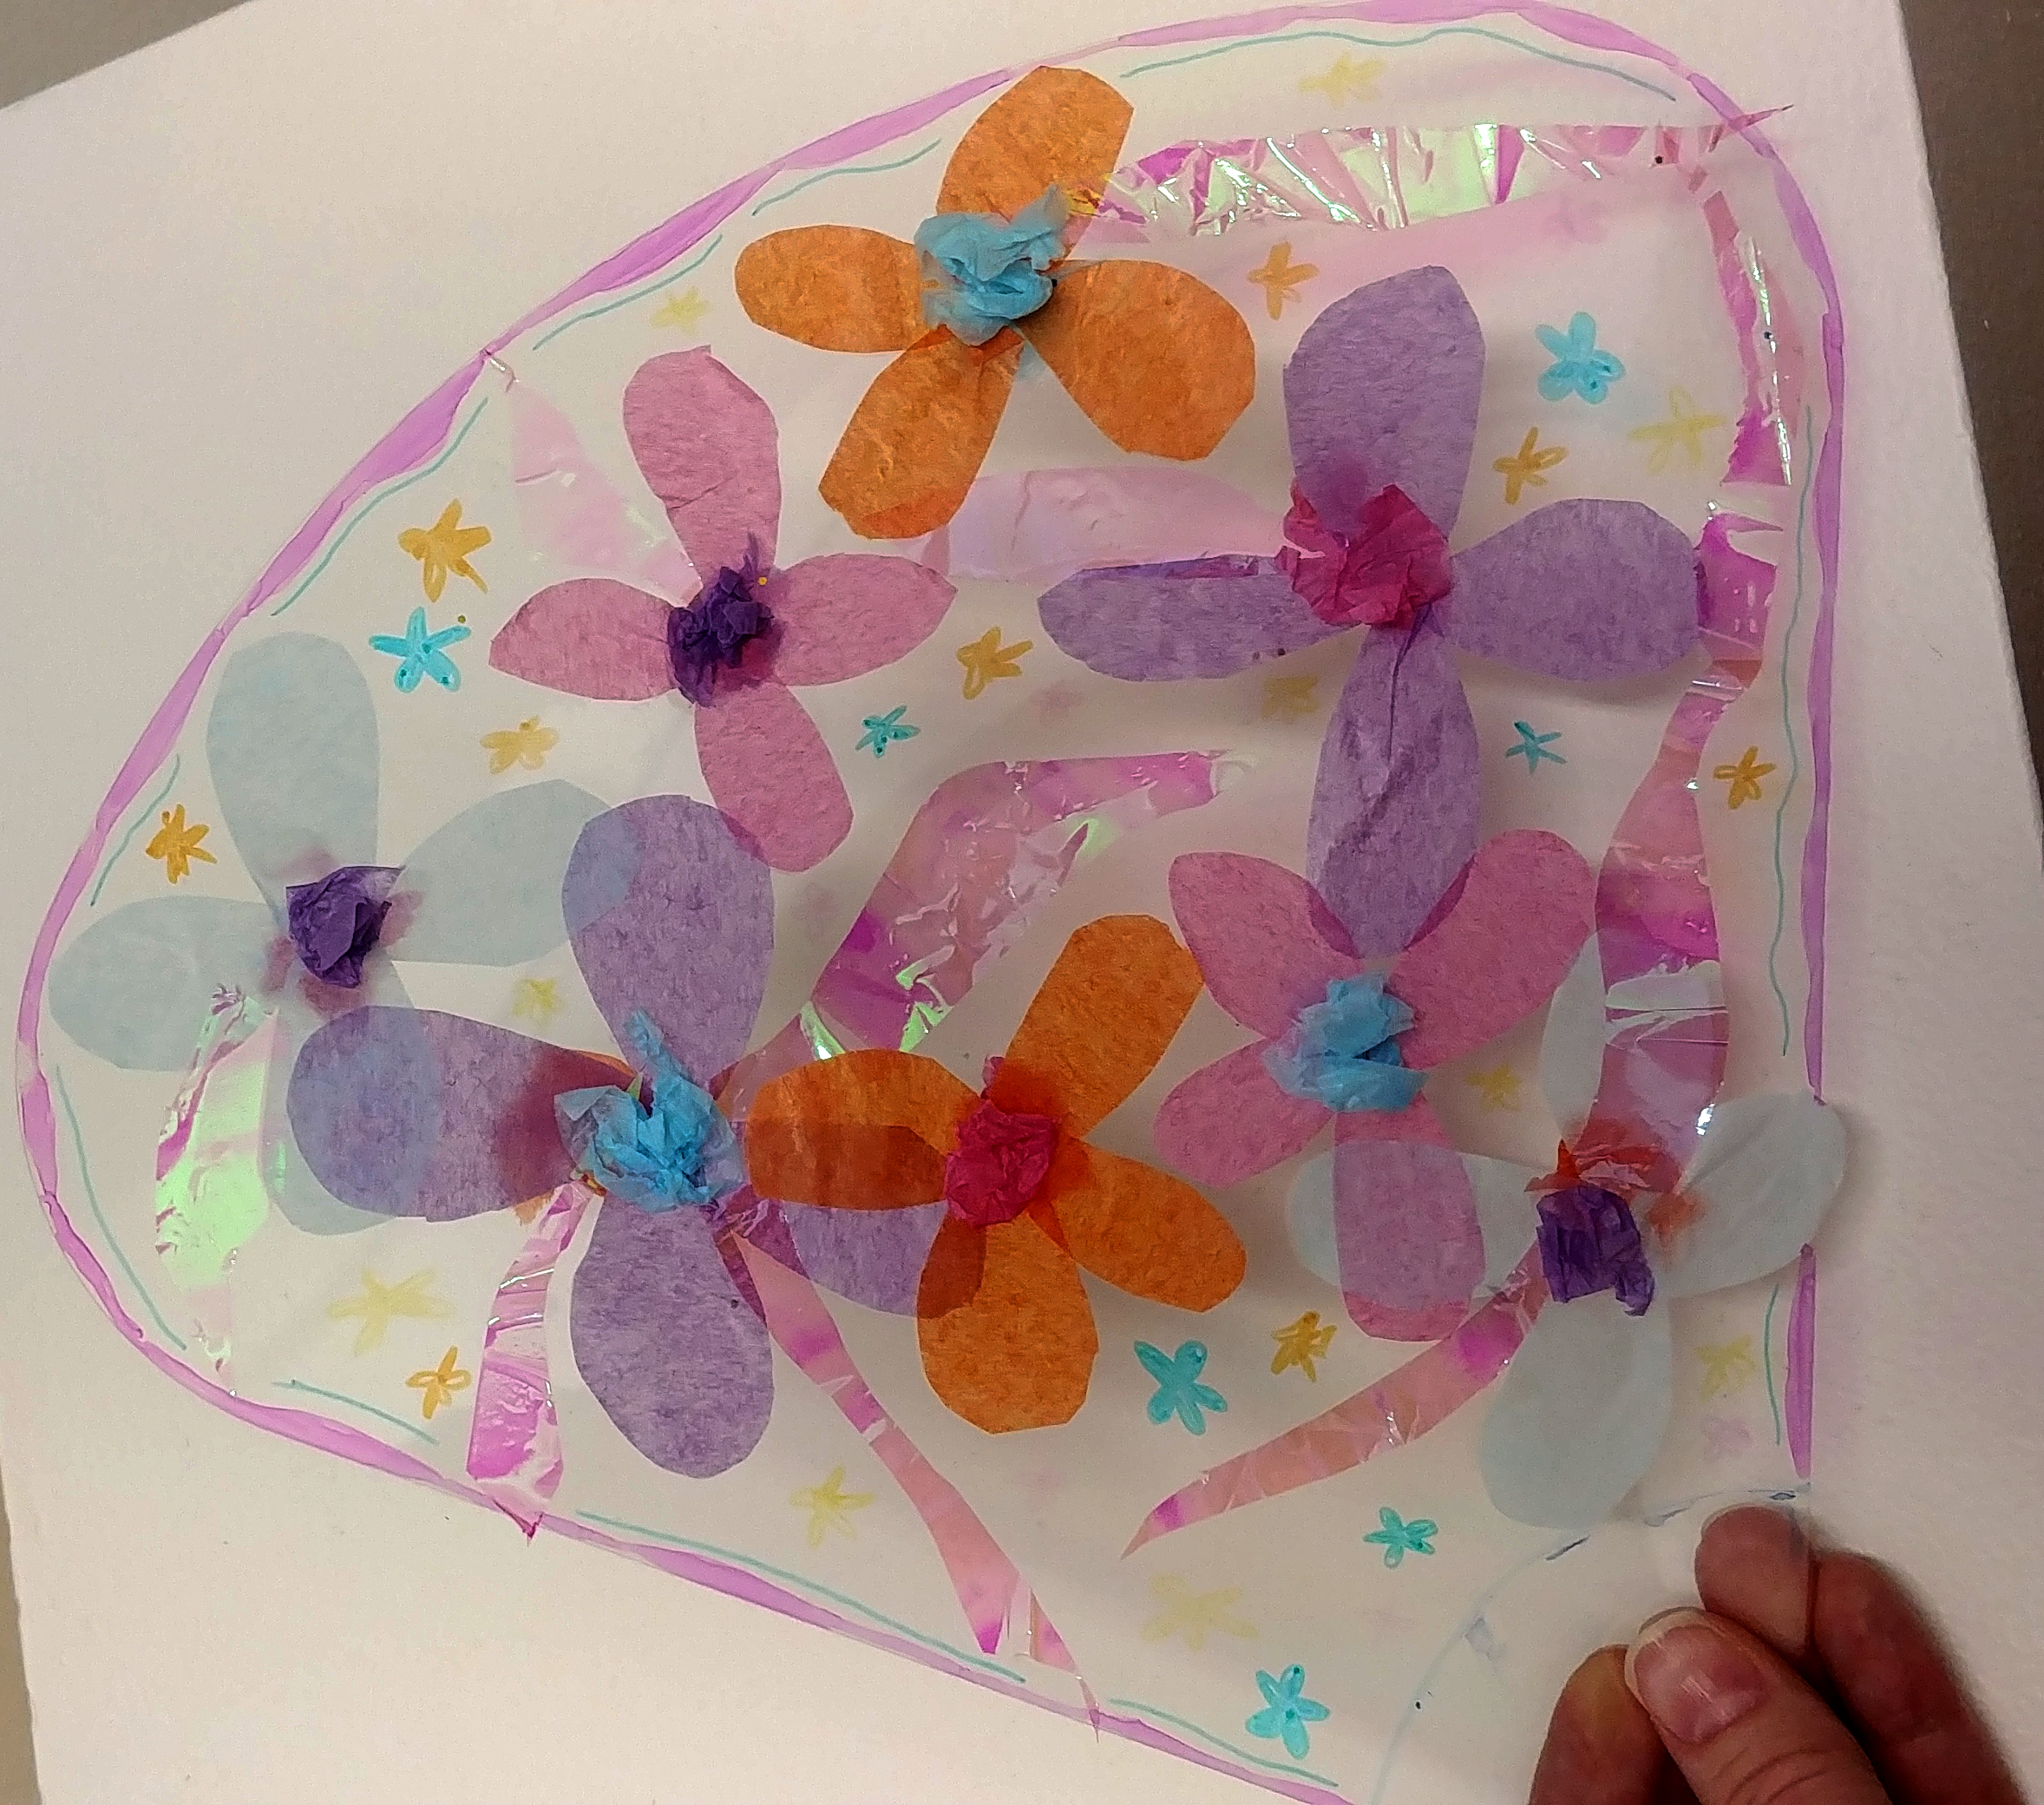 Flower petal decorated with tissue